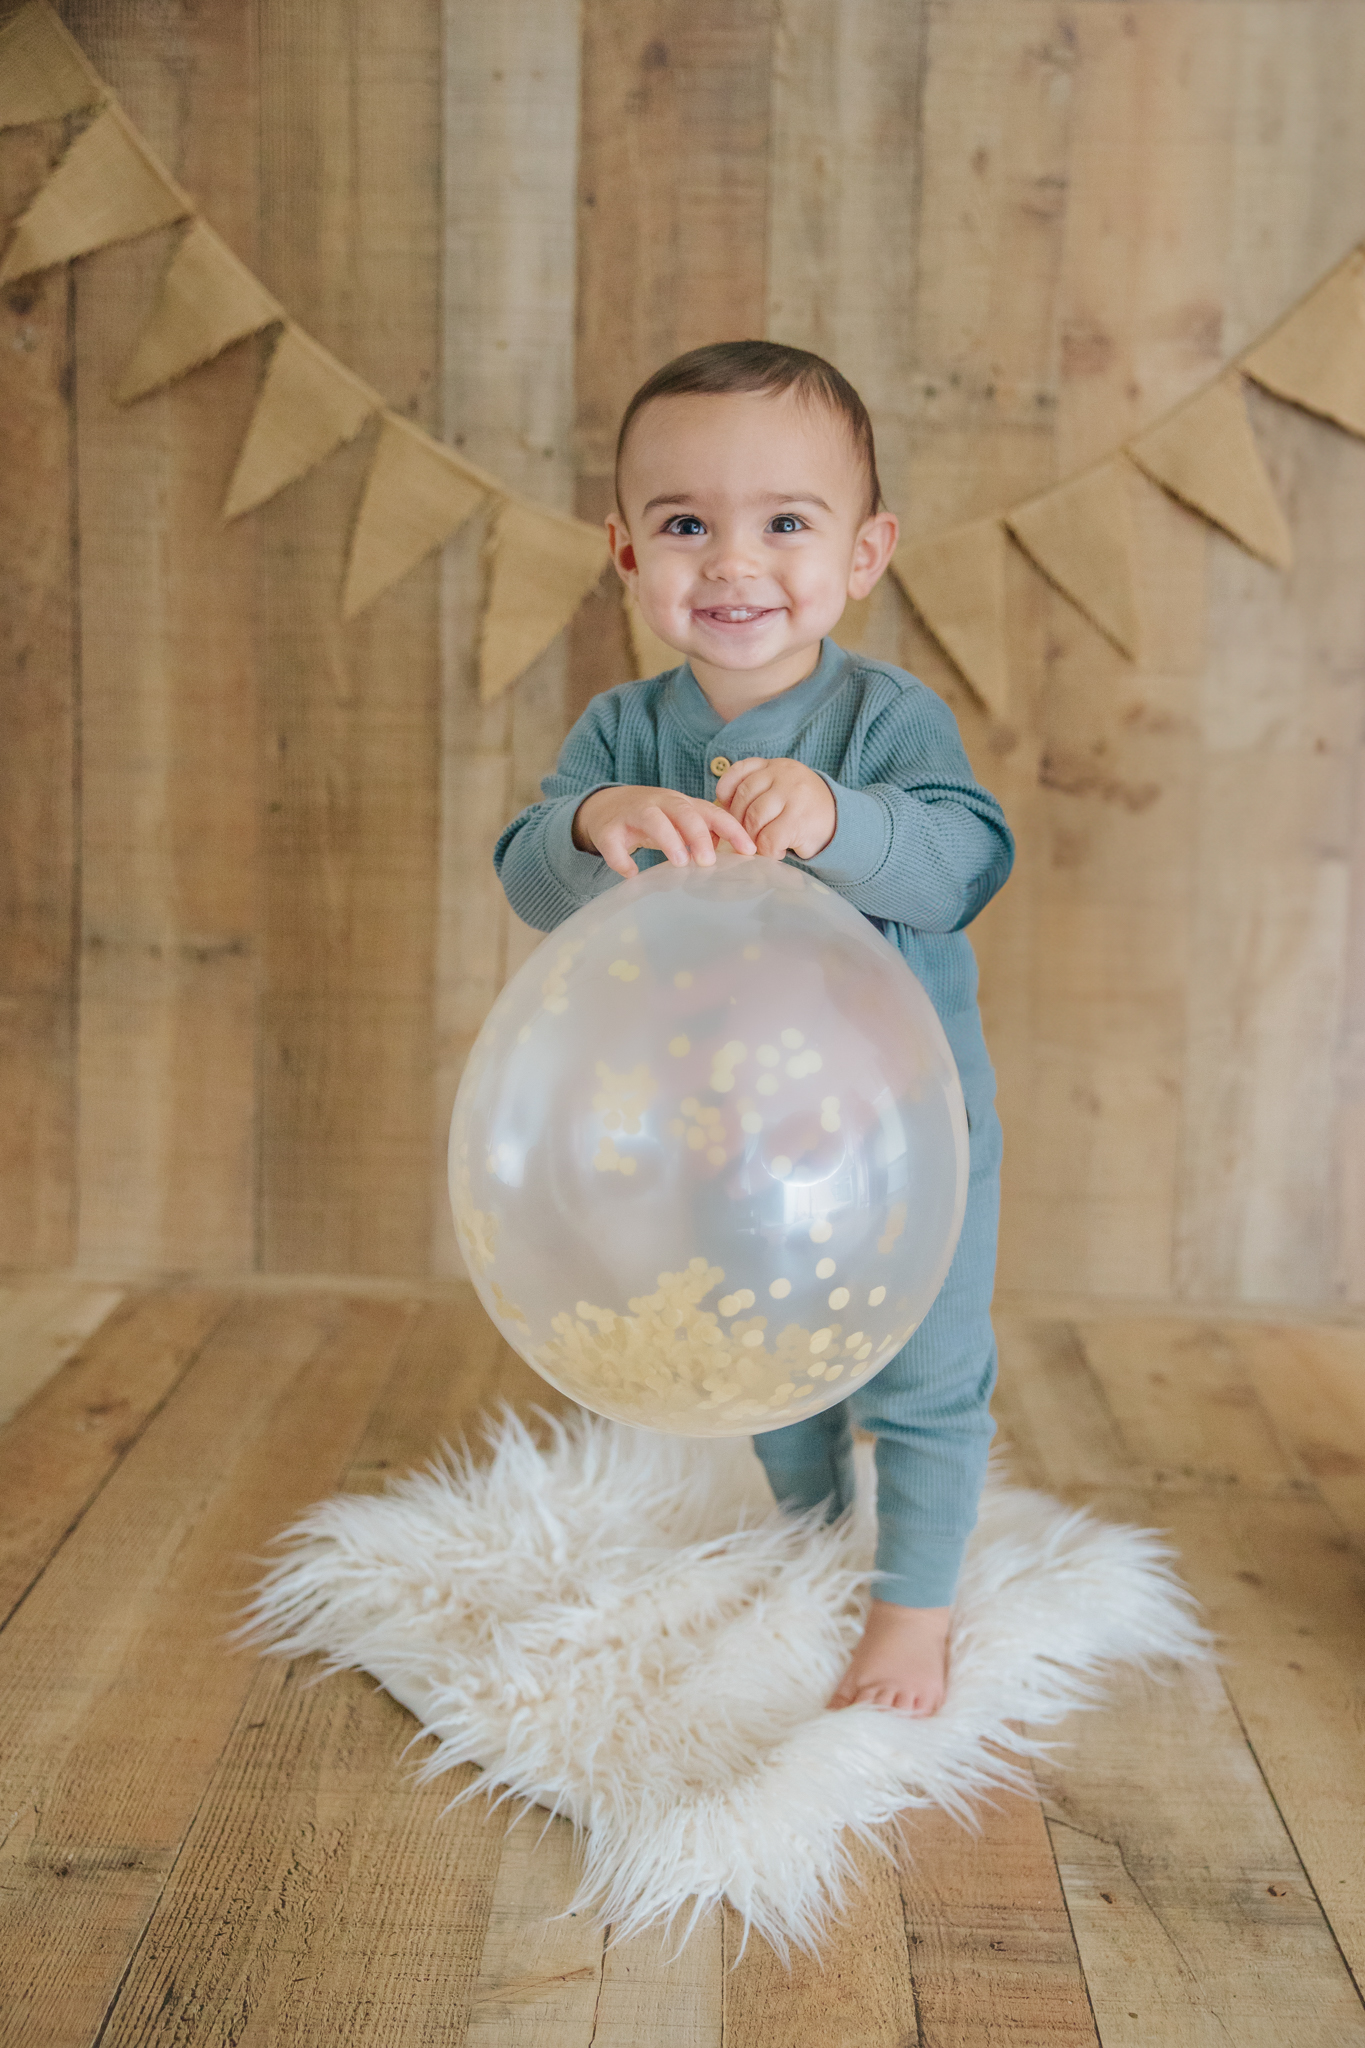 one-year-old holding a balloon at photography studio | Kelly Adrienne Photography